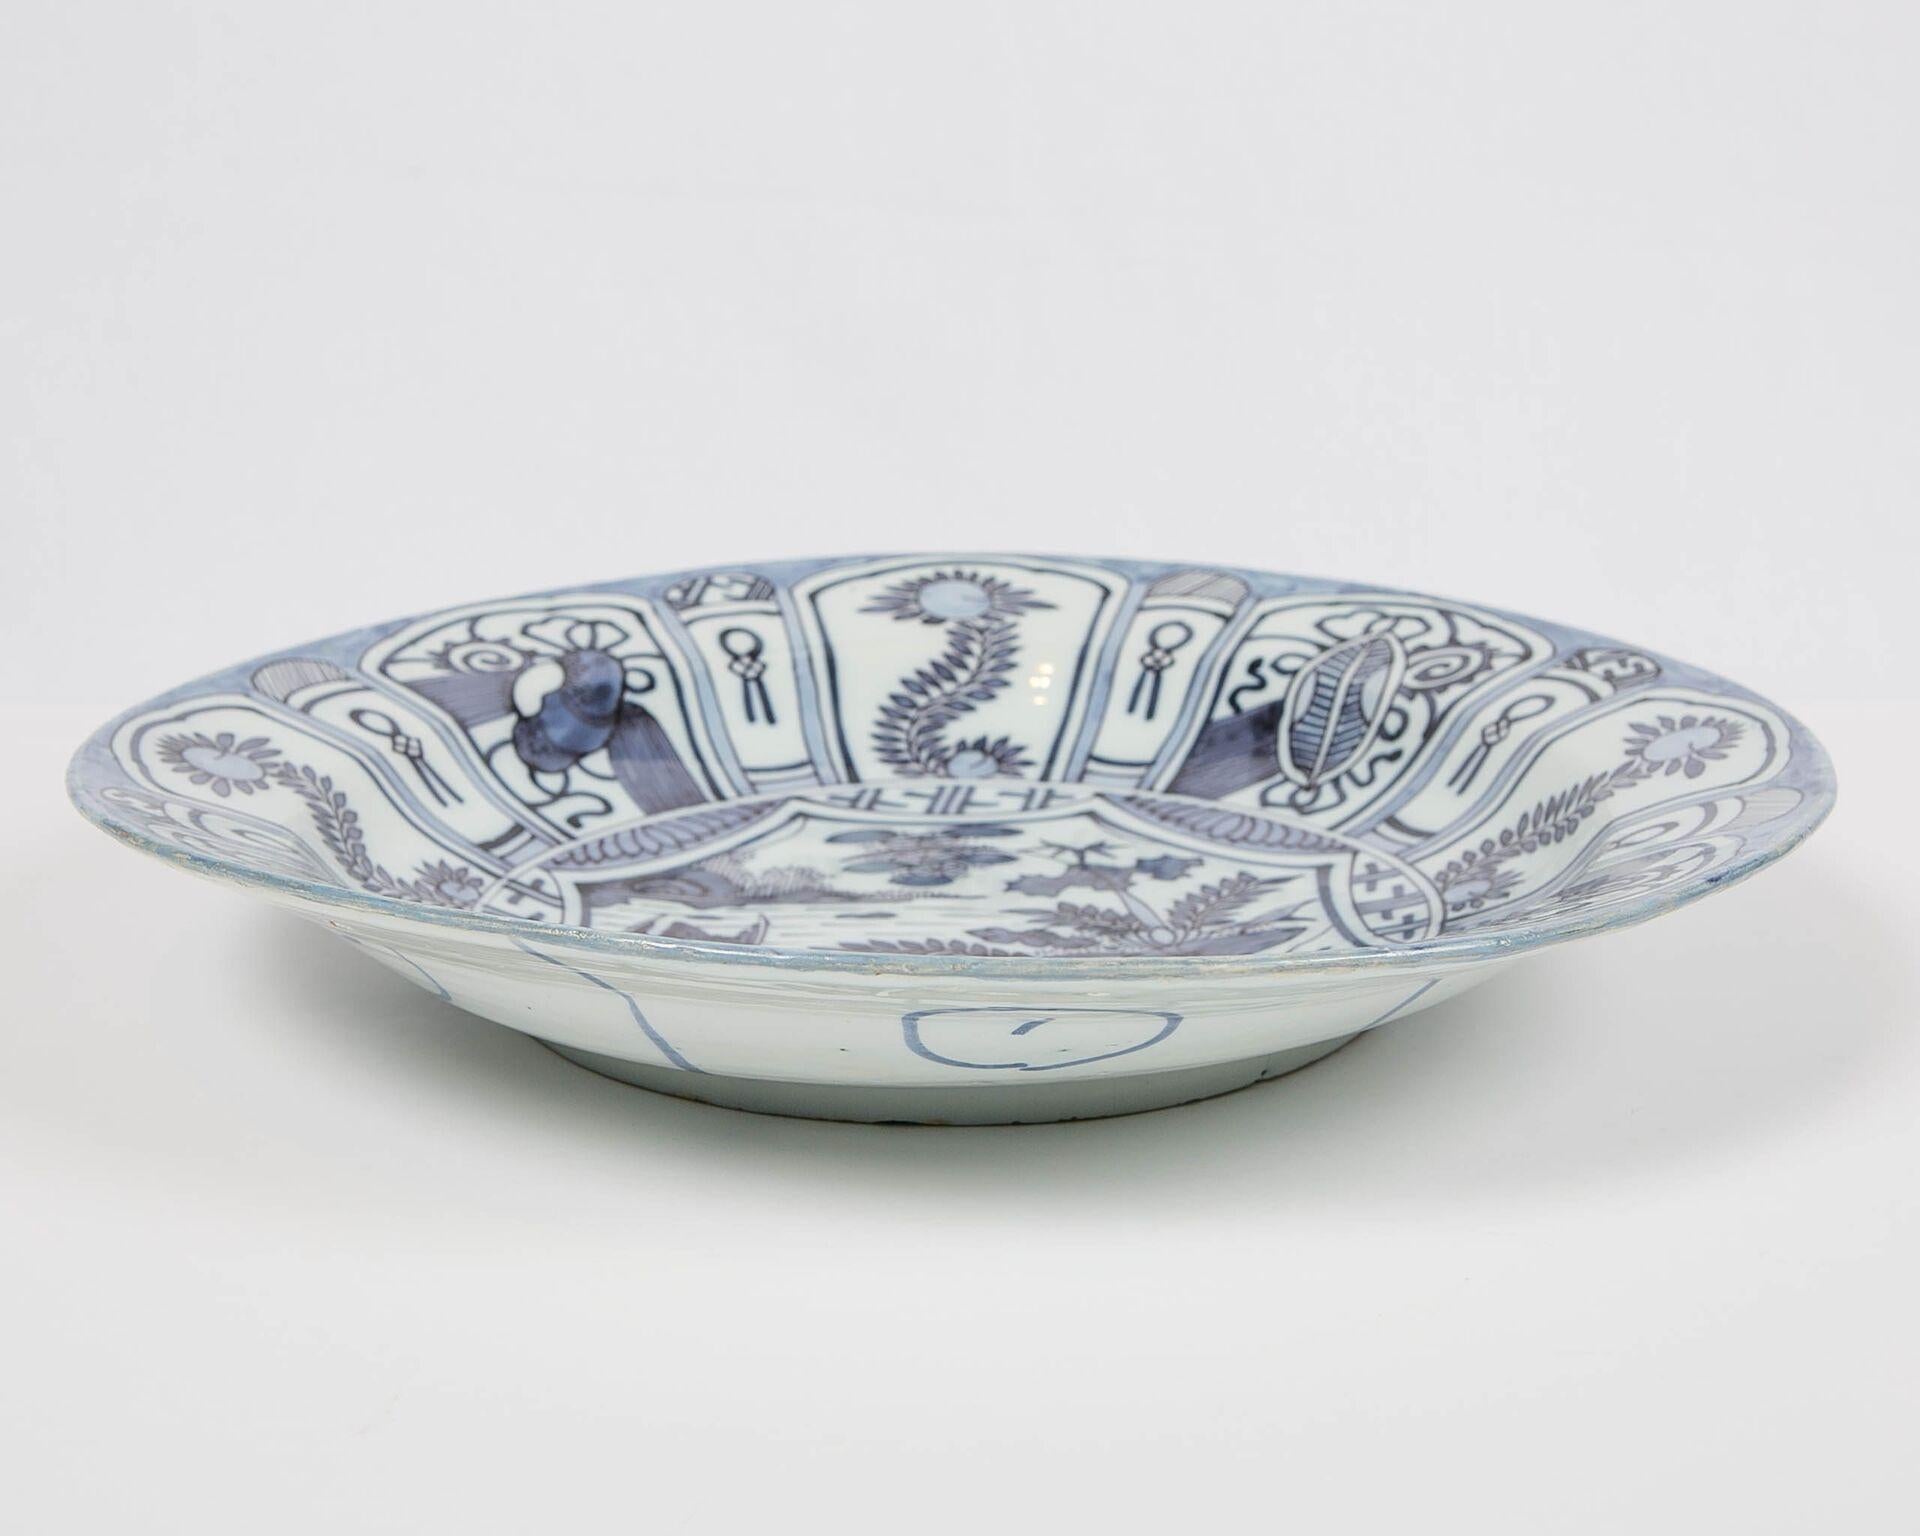 Extra Large Delft Blue and White Charger Made, 1680-1700 1